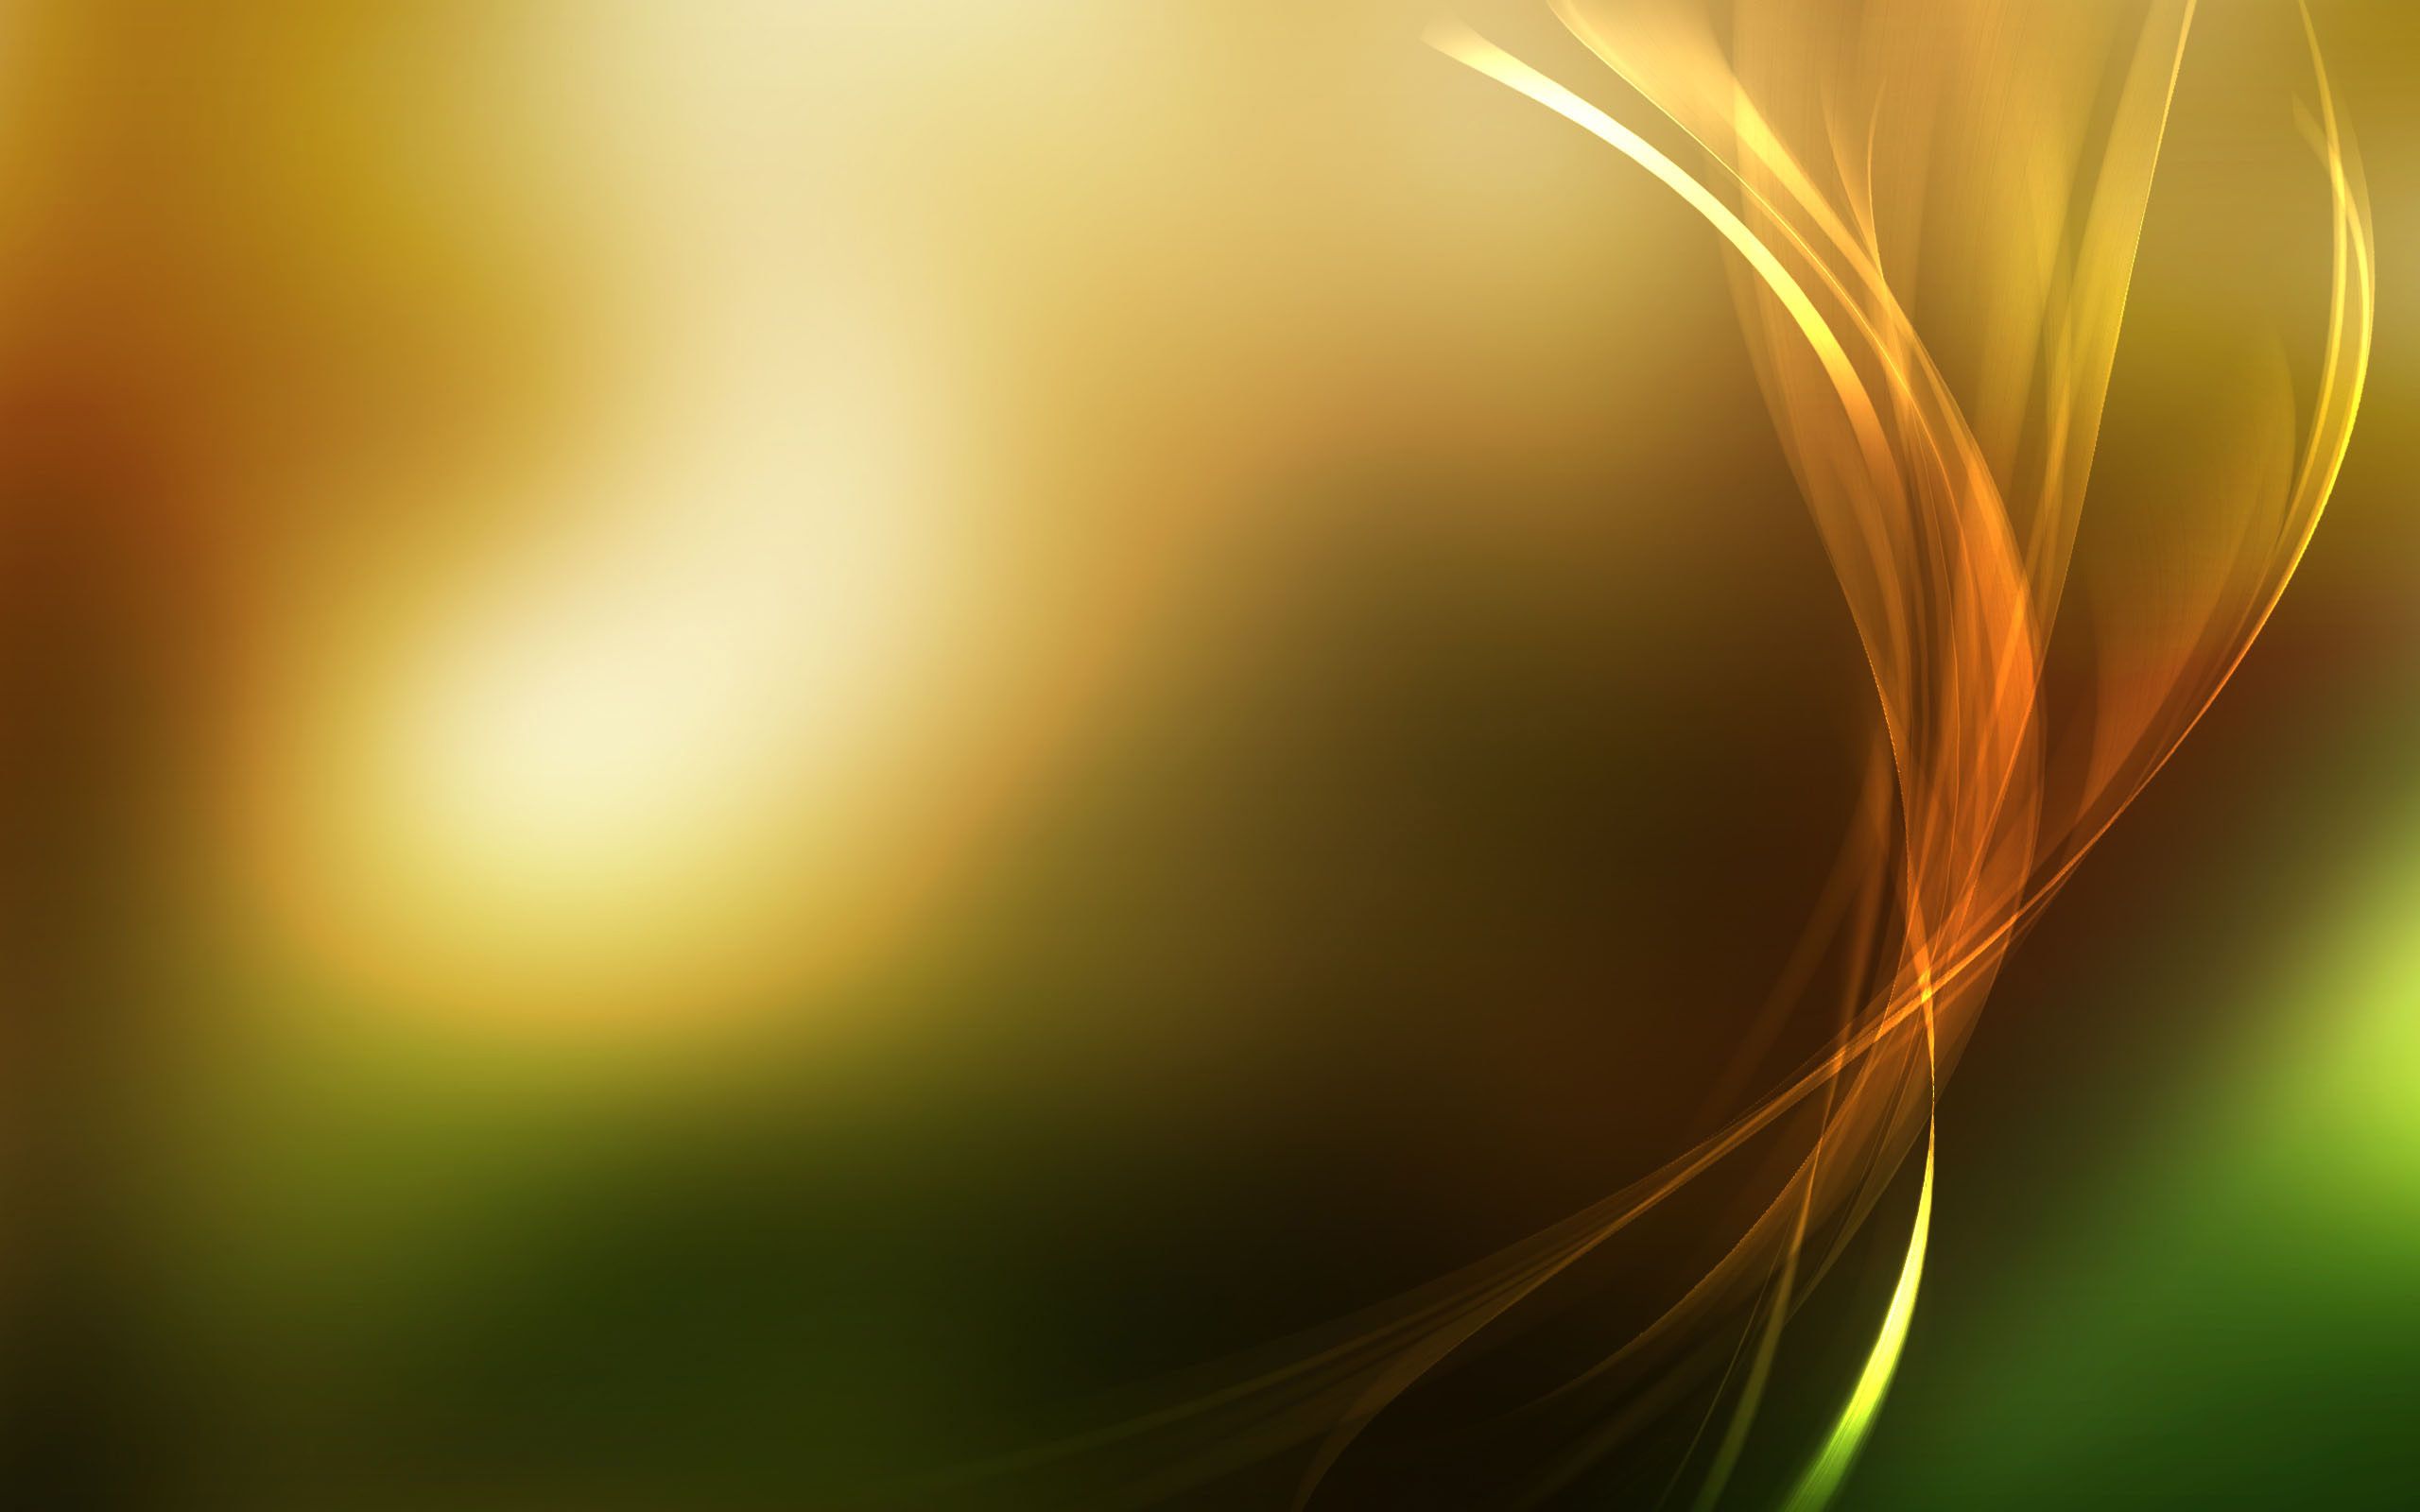 Abstract Wallpaper for Desktop Background in Gold Color. HD